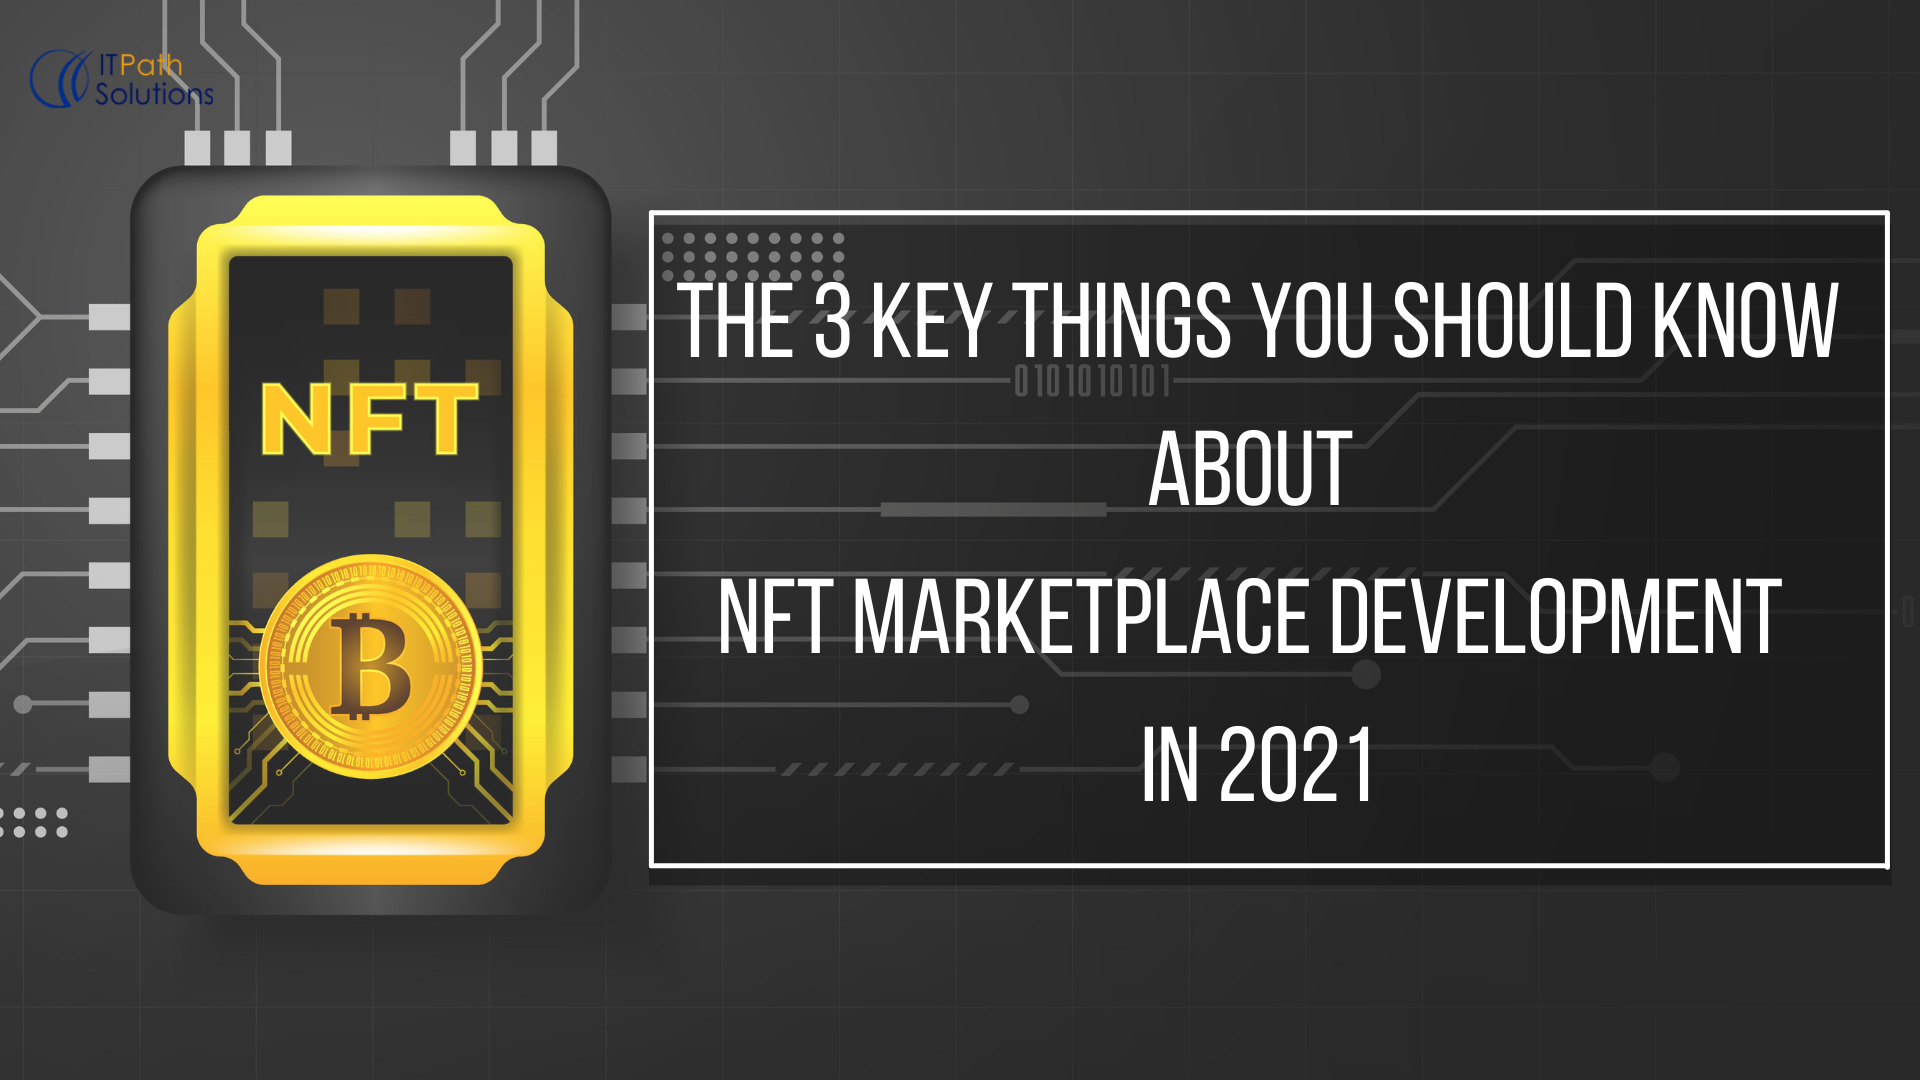 The 3 Key Things You Should Know About NFT Marketplace Development in